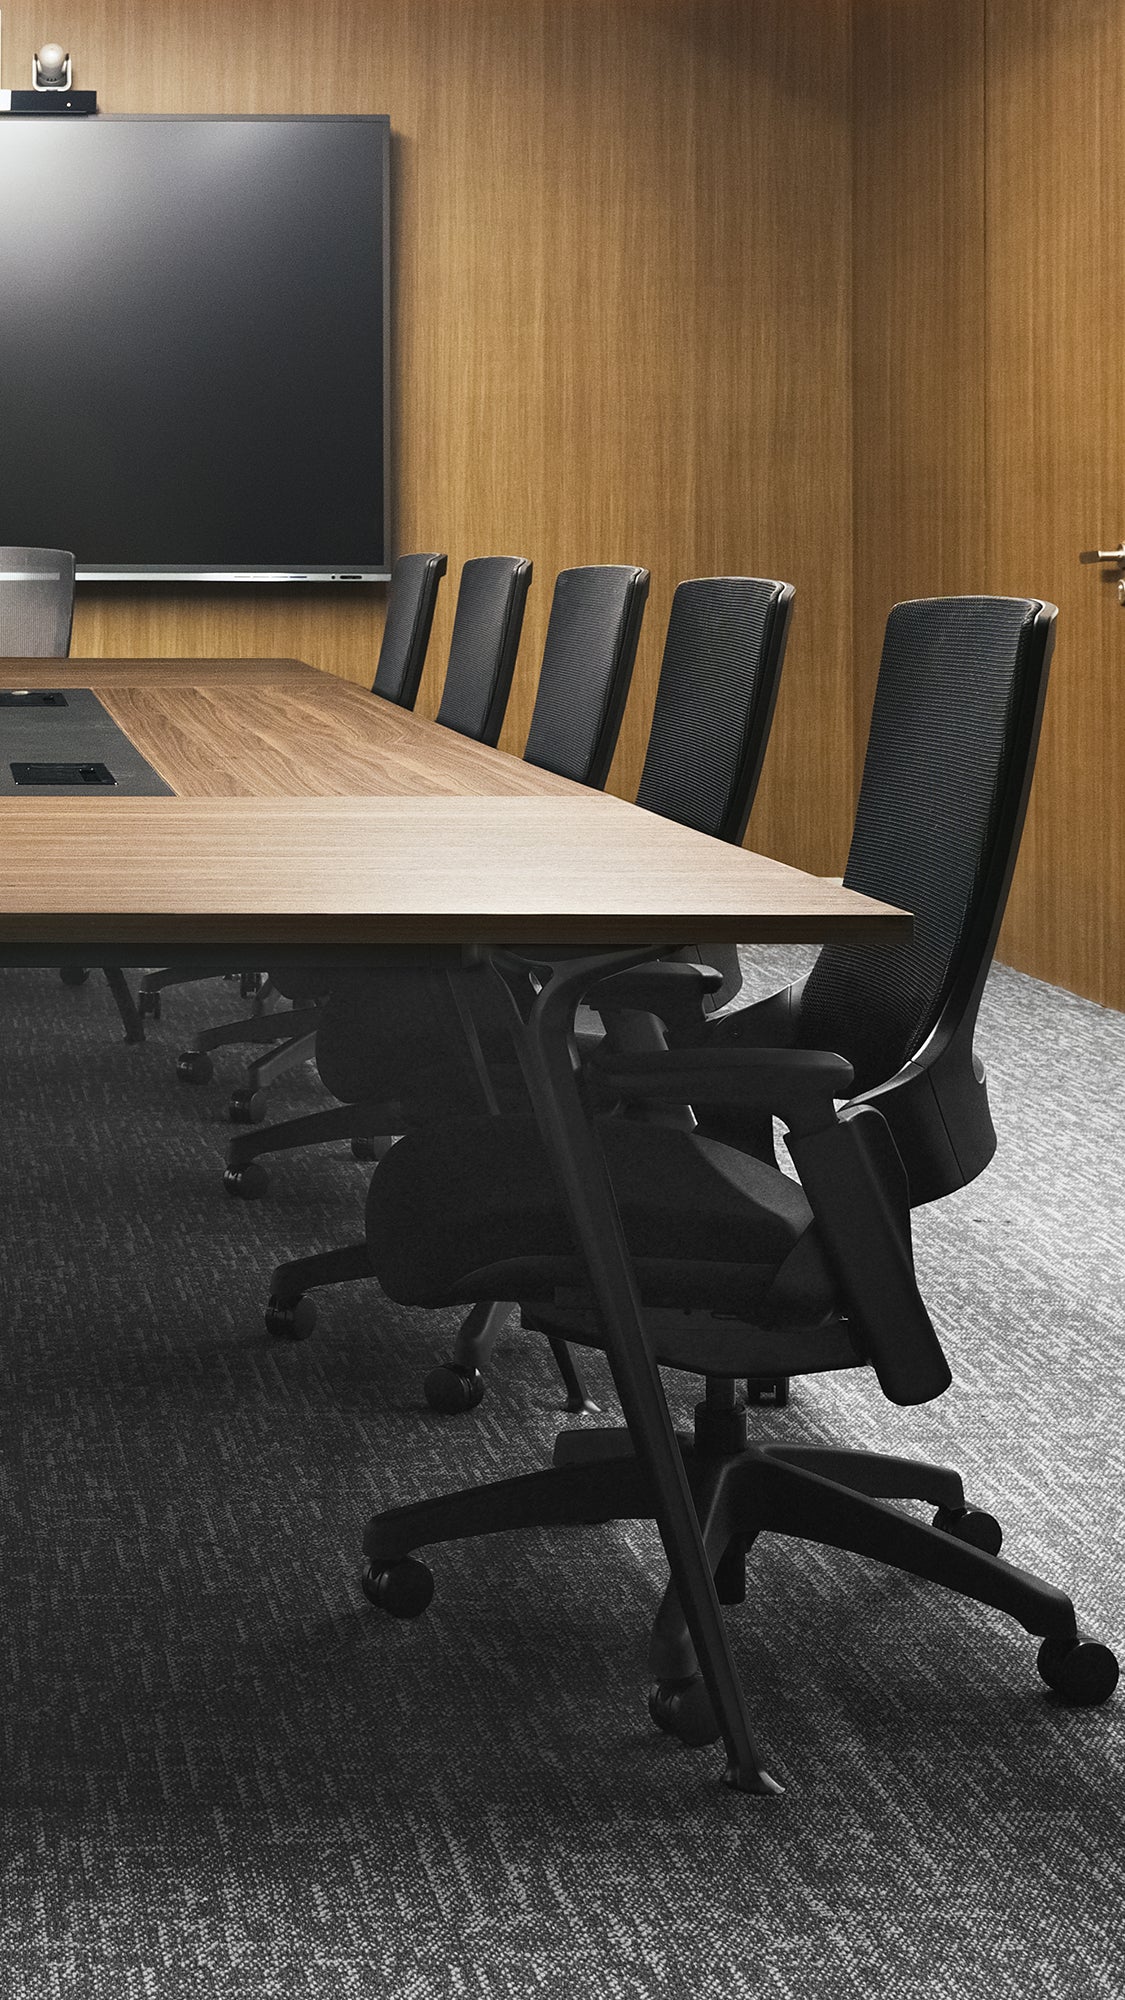 Elegant boardroom with Flujo office chairs around a large wooden table, illustrating a professional and stylish meeting environment.